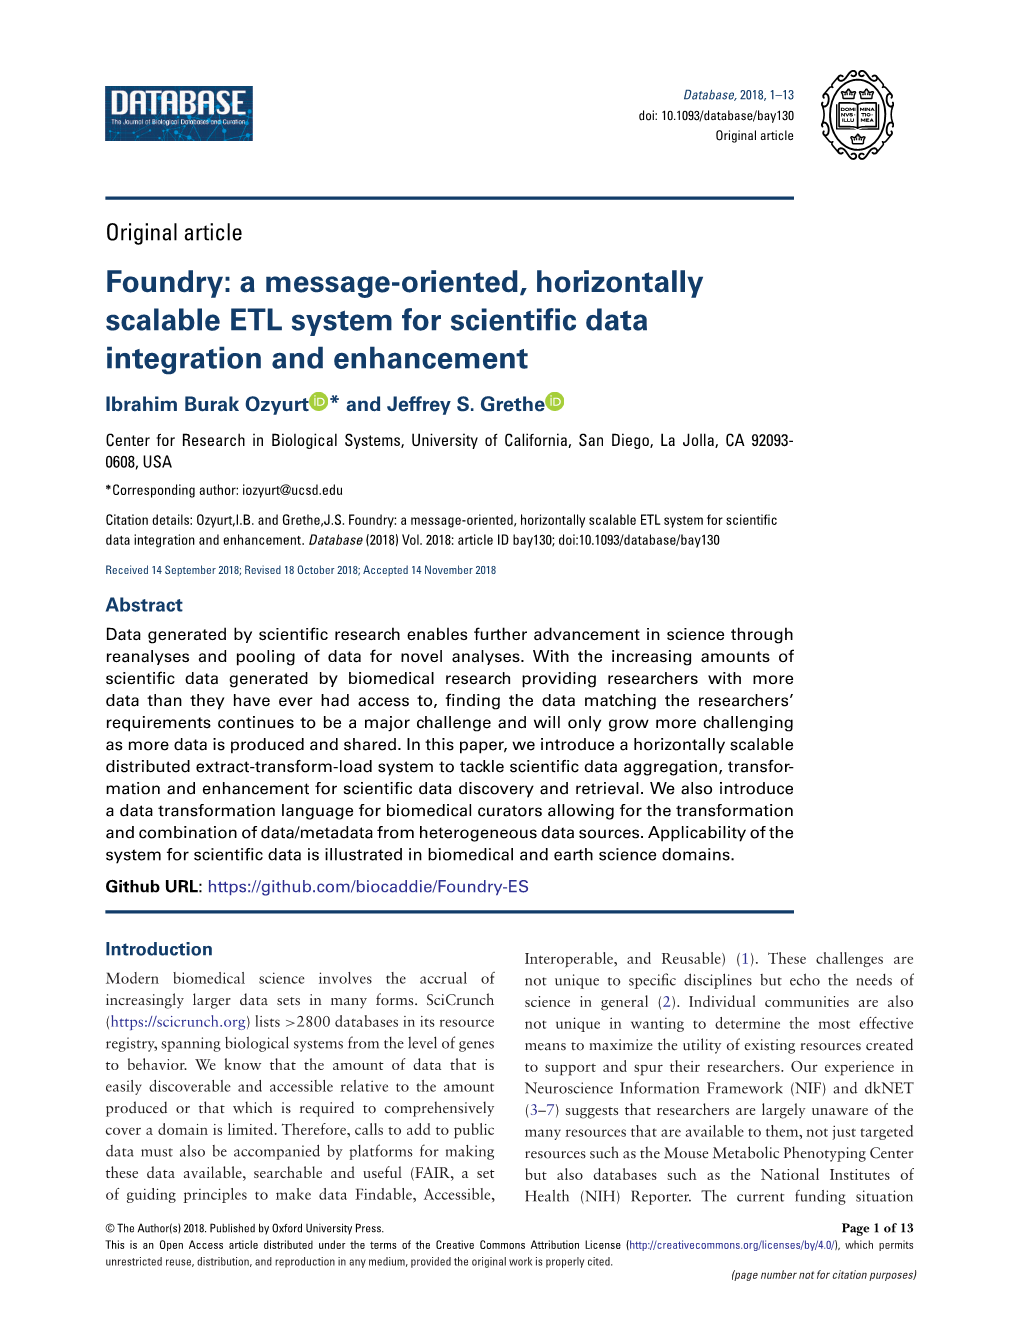 A Message-Oriented, Horizontally Scalable ETL System for Scientific